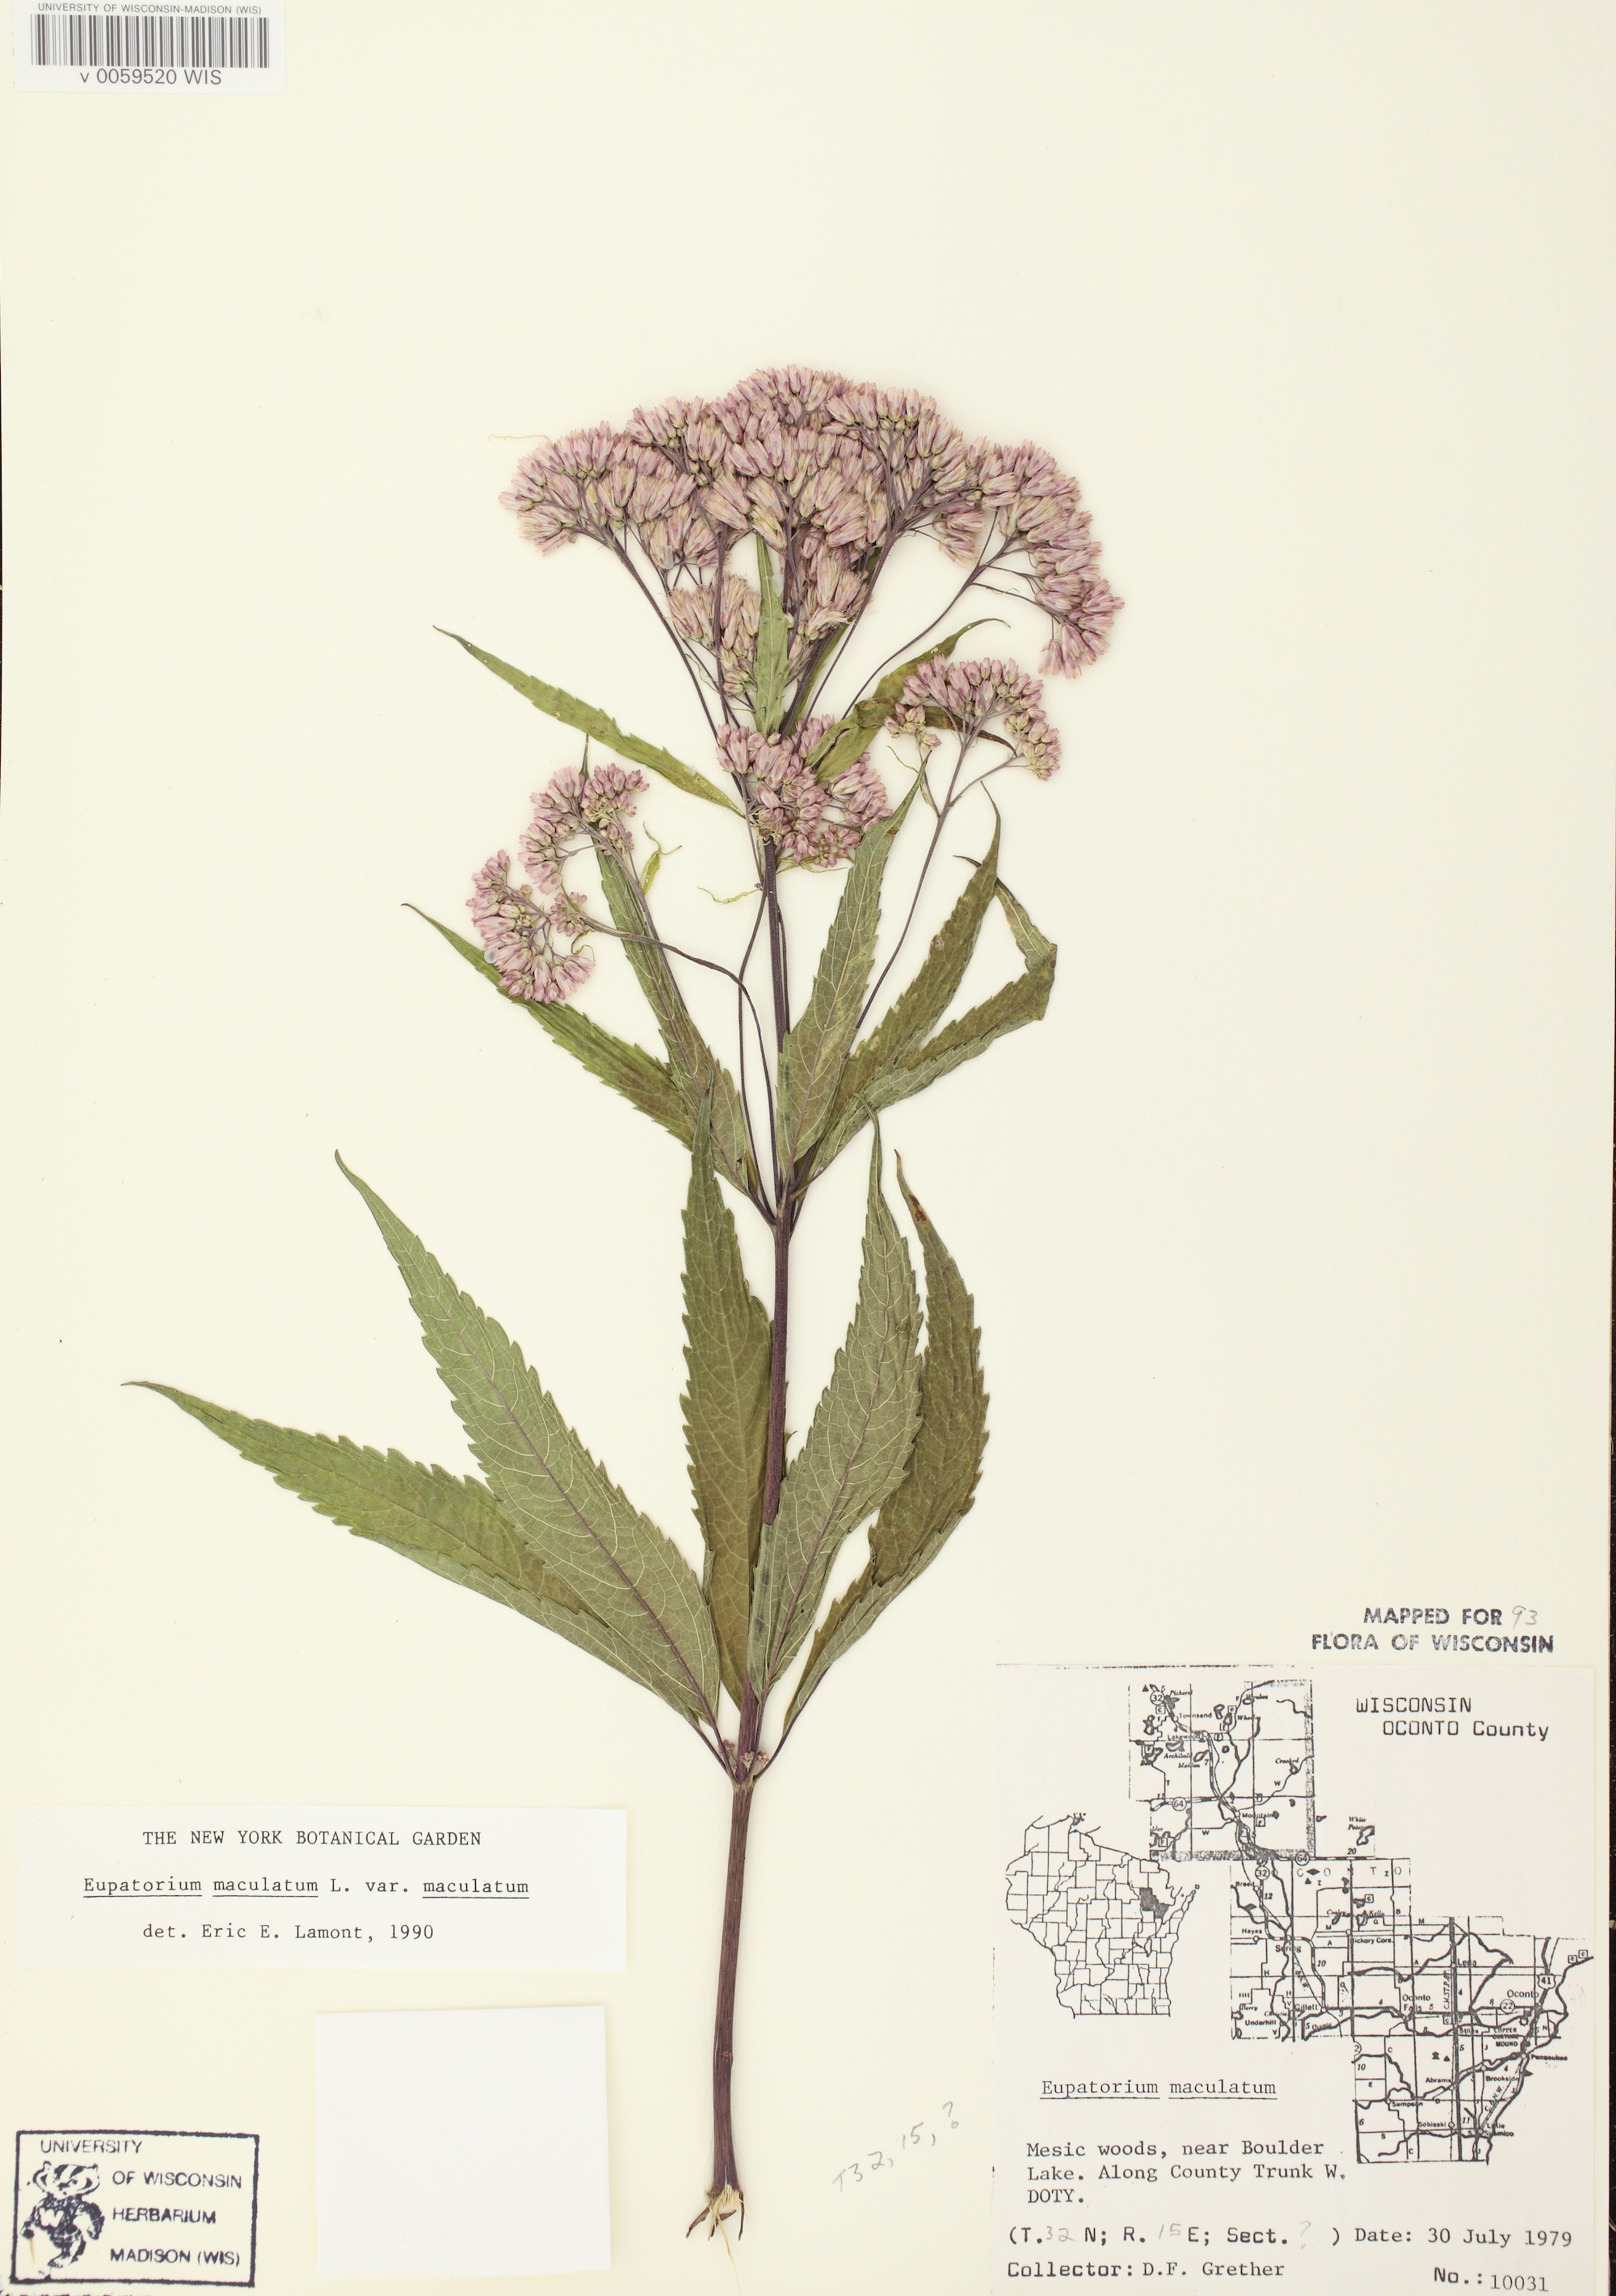 Spotted Joe-Pye Weed specimen collected near Boulder Lake in Oconto County, Wisconsin on July 30, 1979.